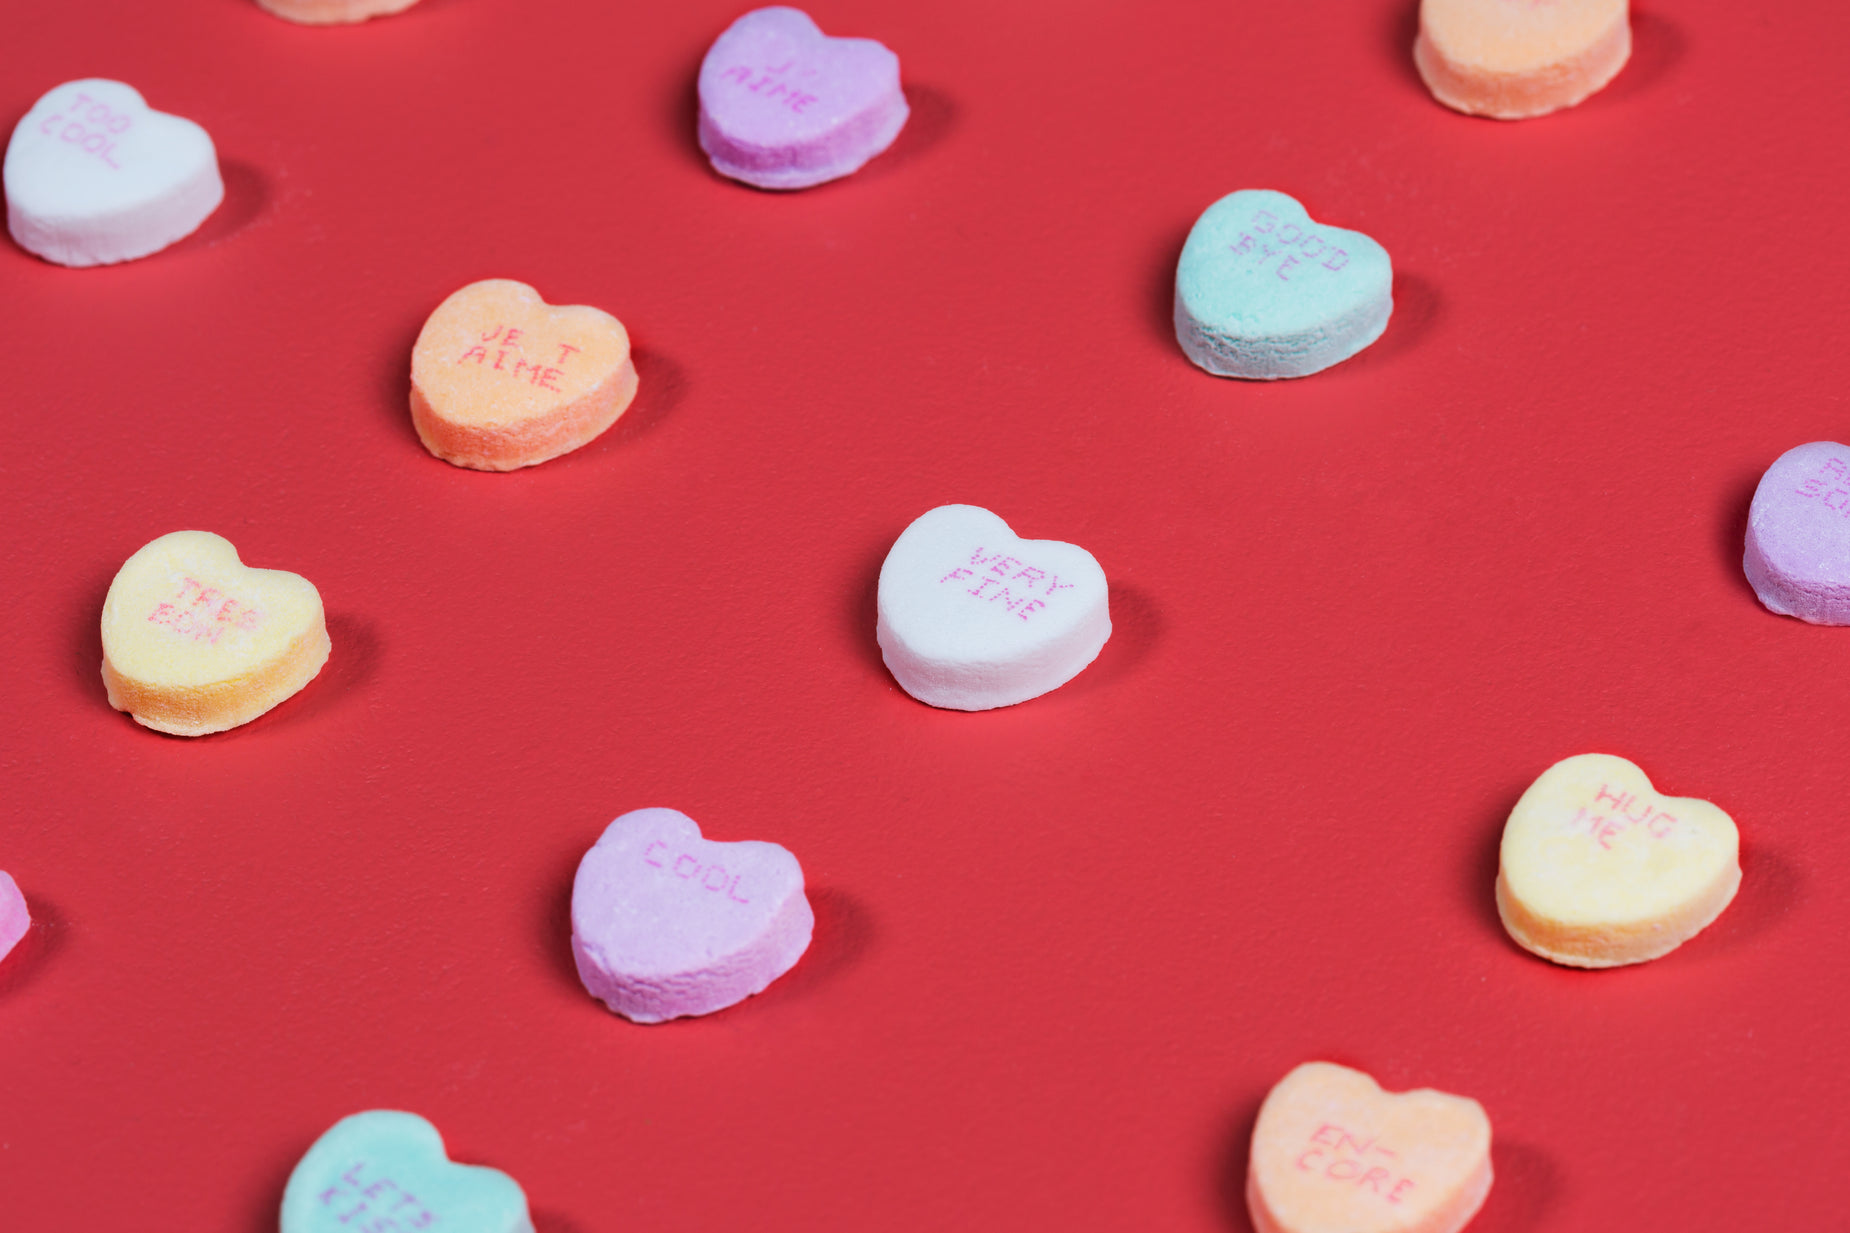 many small conversation hearts arranged on a red surface